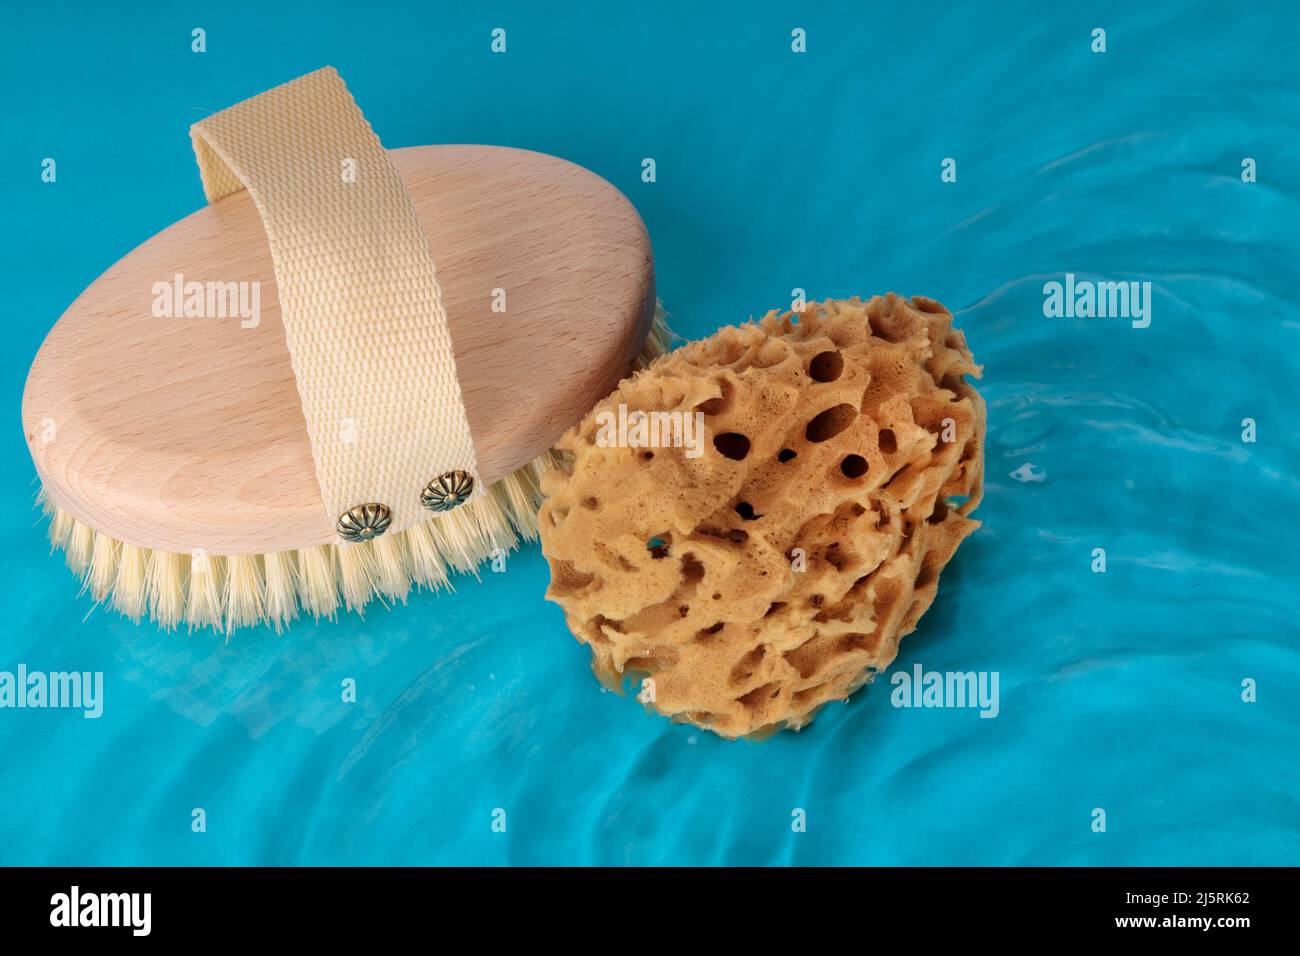 Wooden brush made of natural material and natural sponge. Bathroom treatments. Home body care. Conceptual image Stock Photo